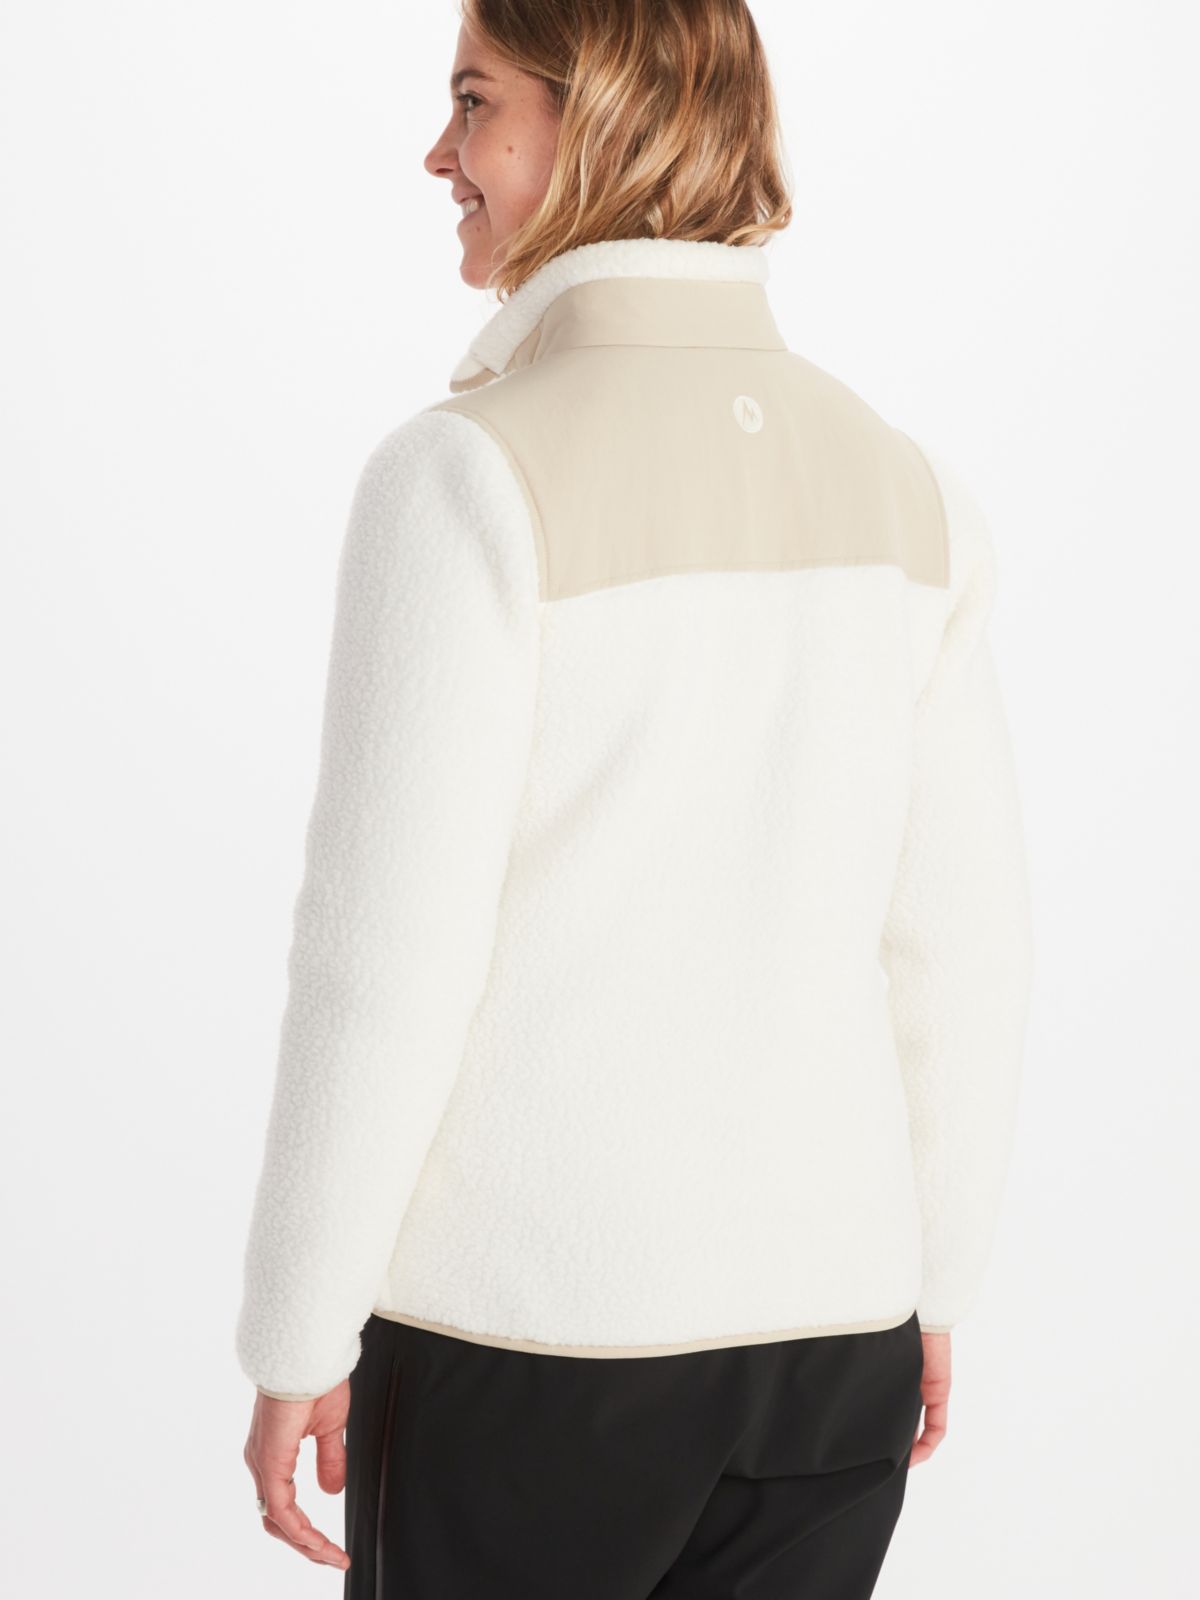 womens pullover behind view